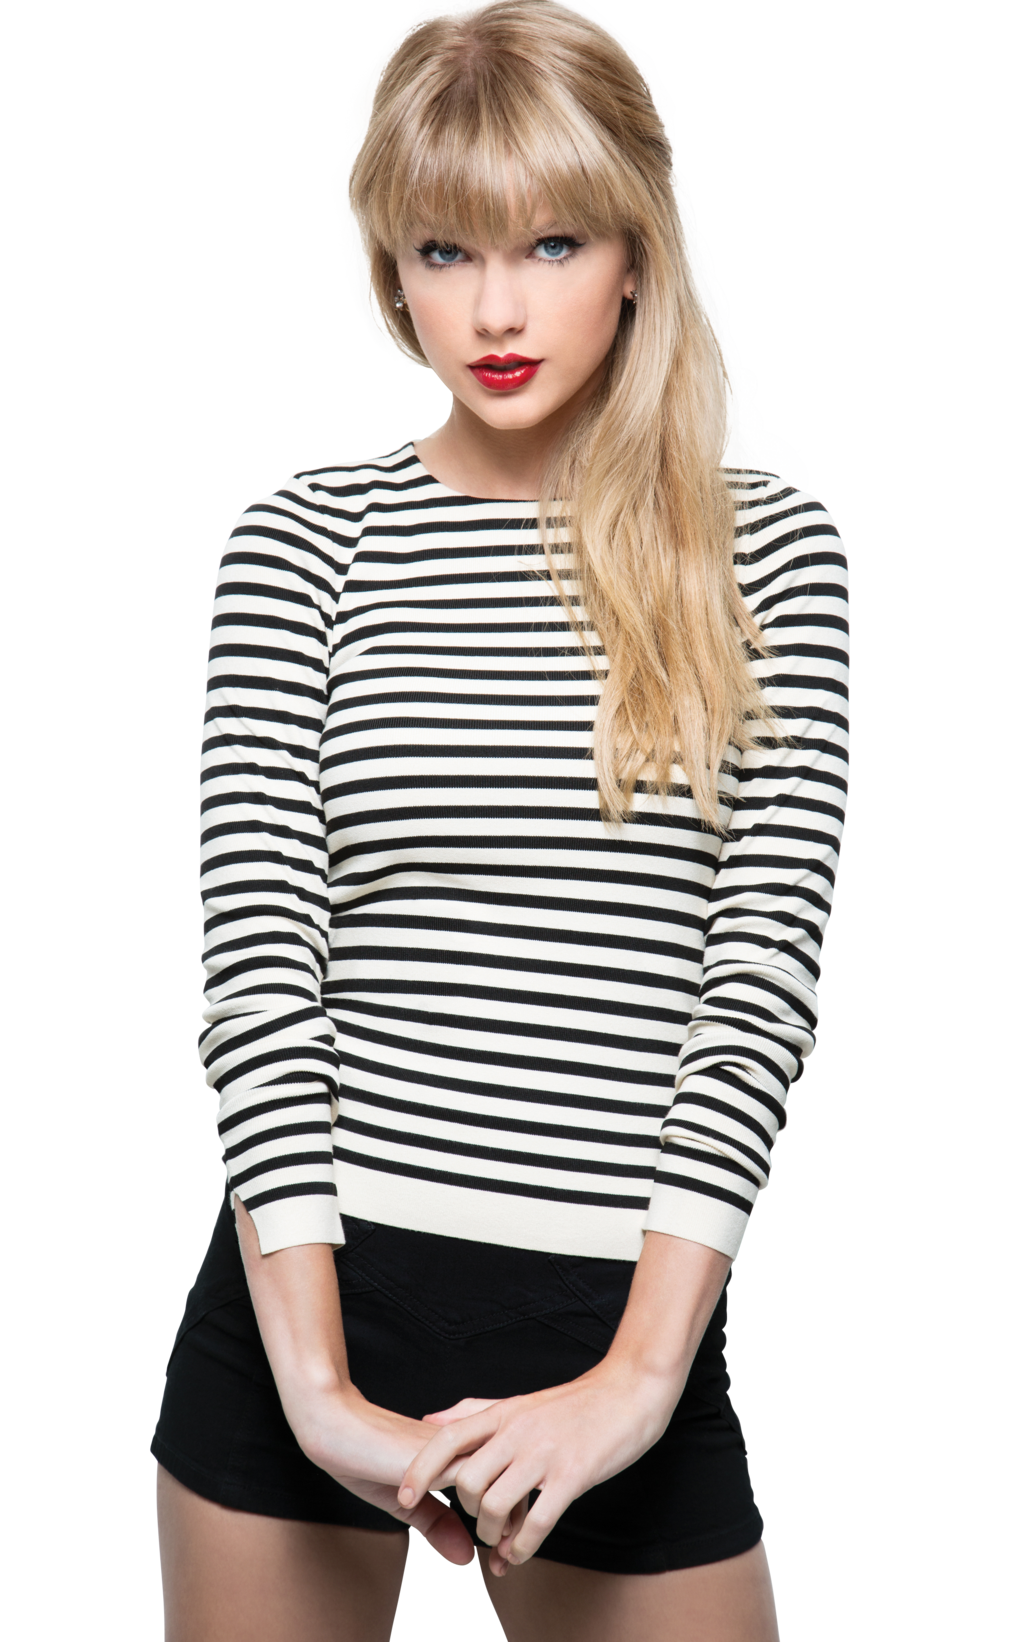 Taylor Swift Png By Mae Editions On Deviantart